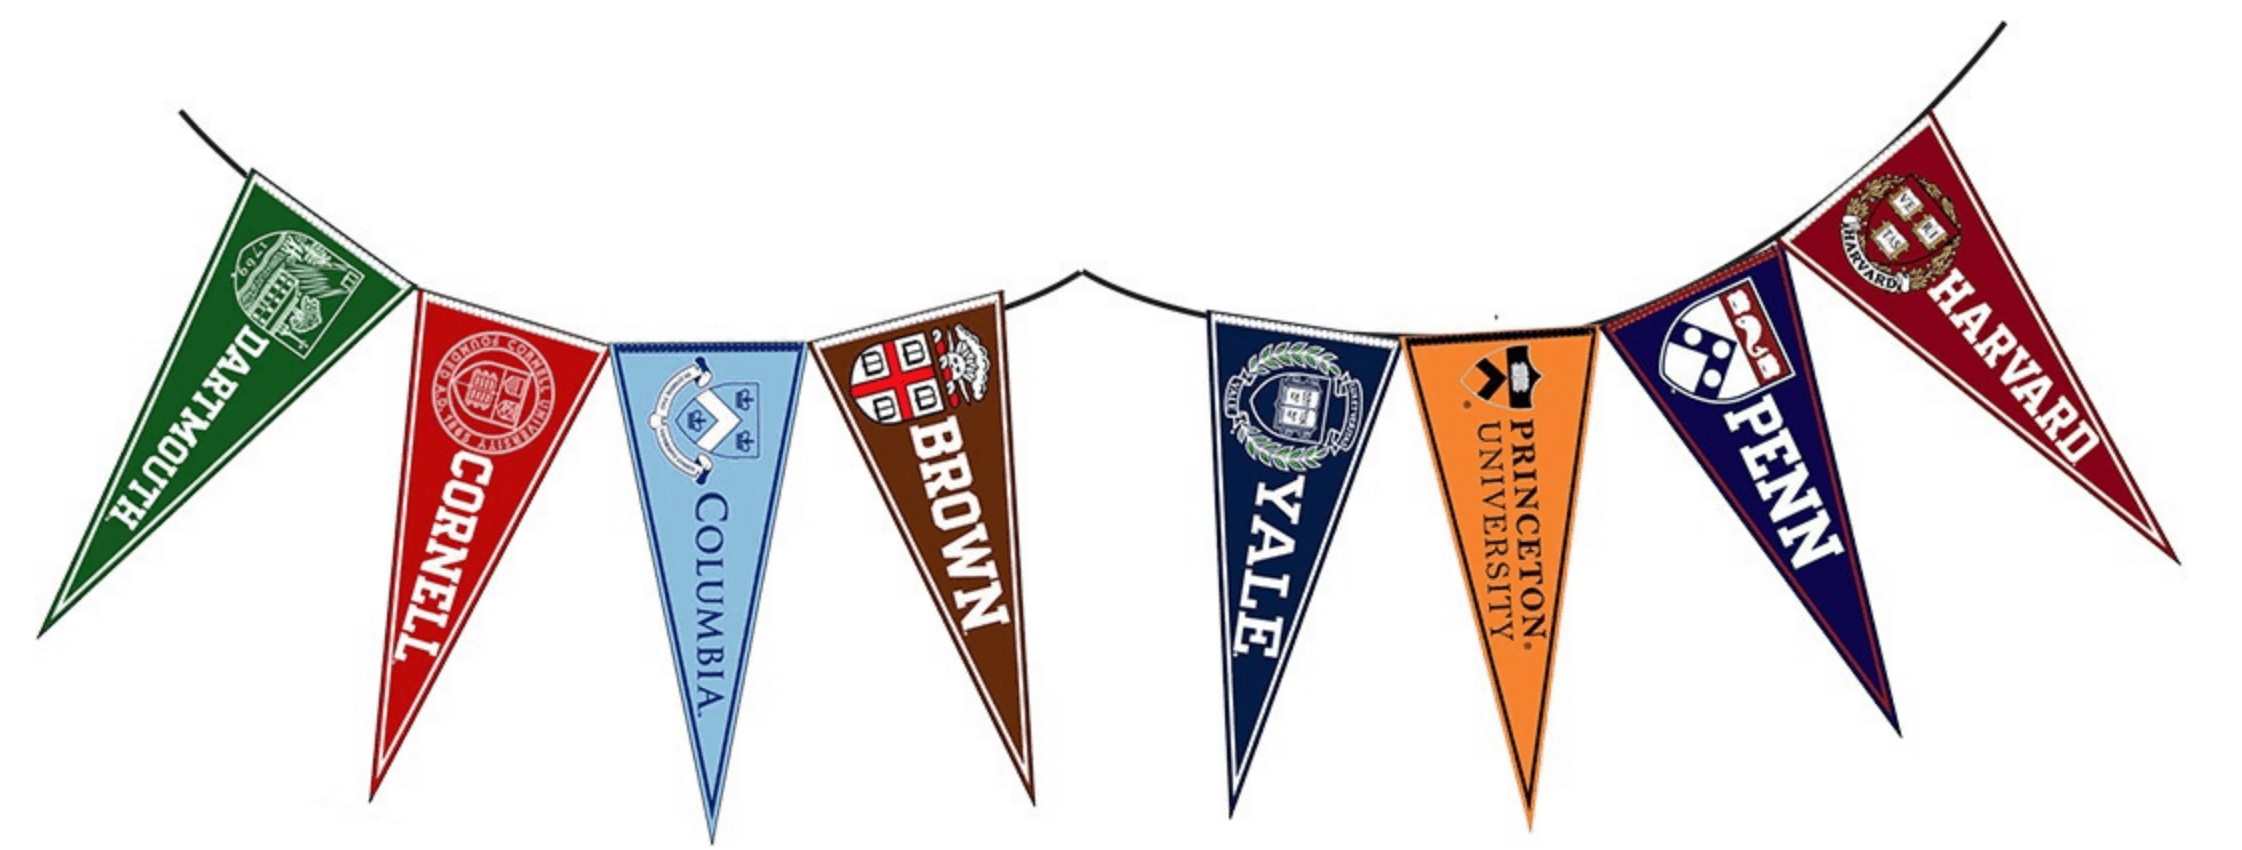 Featured image for “Looking Beyond Ivy League Hype”